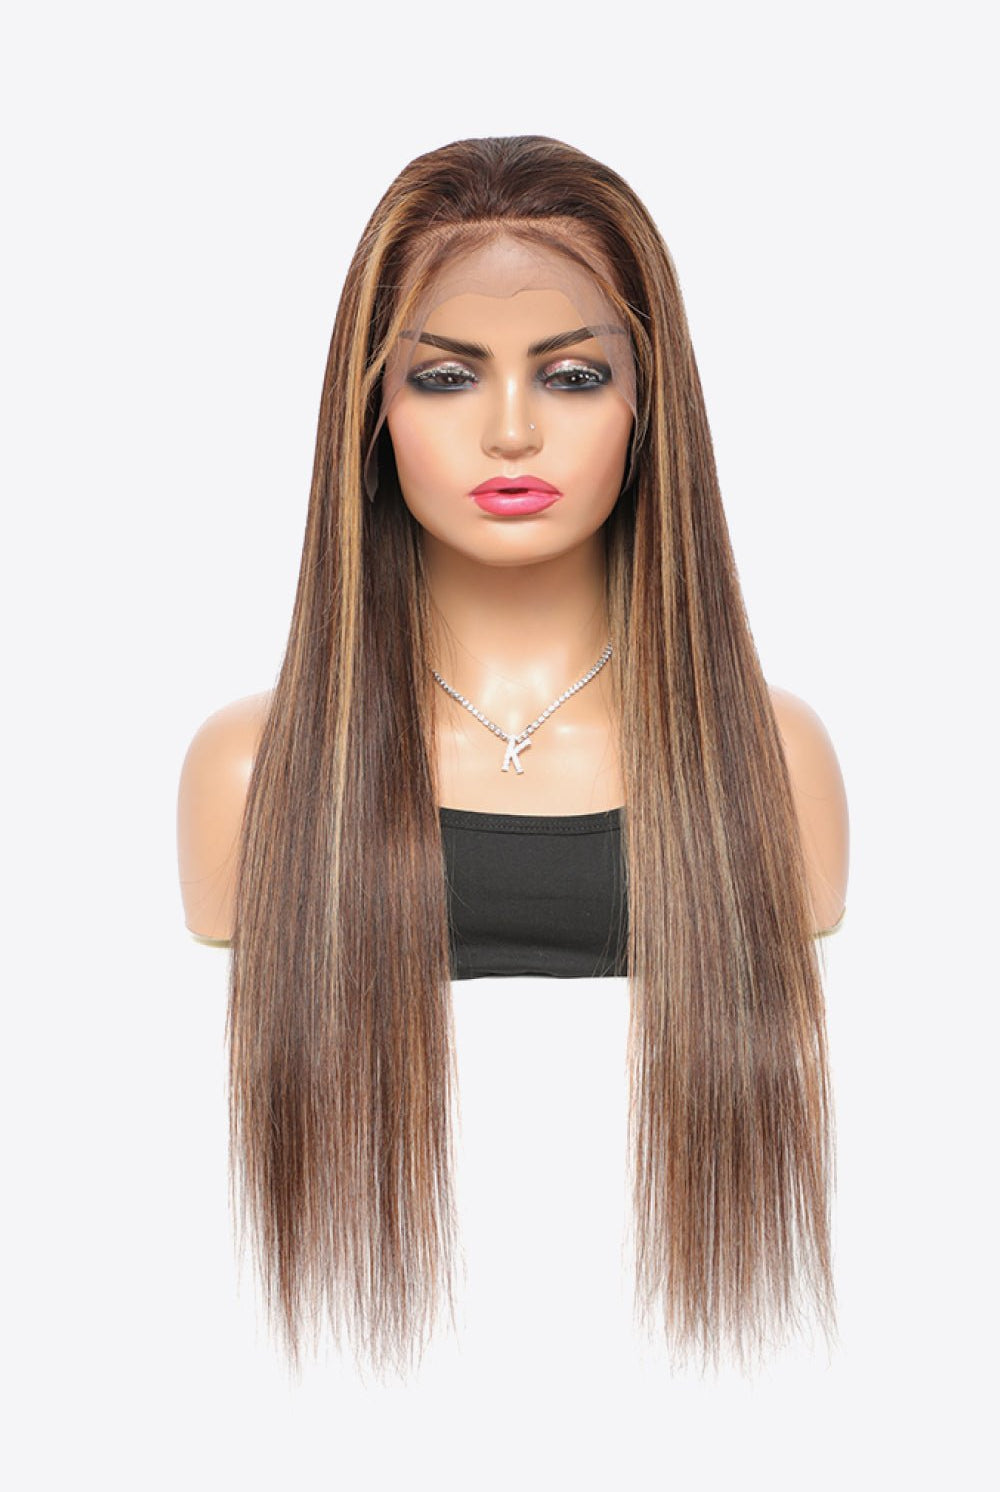 18" 160g Highlight Ombre #P4/27 13x4 Lace Front Wigs Human Virgin Hair 150% Density - GemThreads Boutique